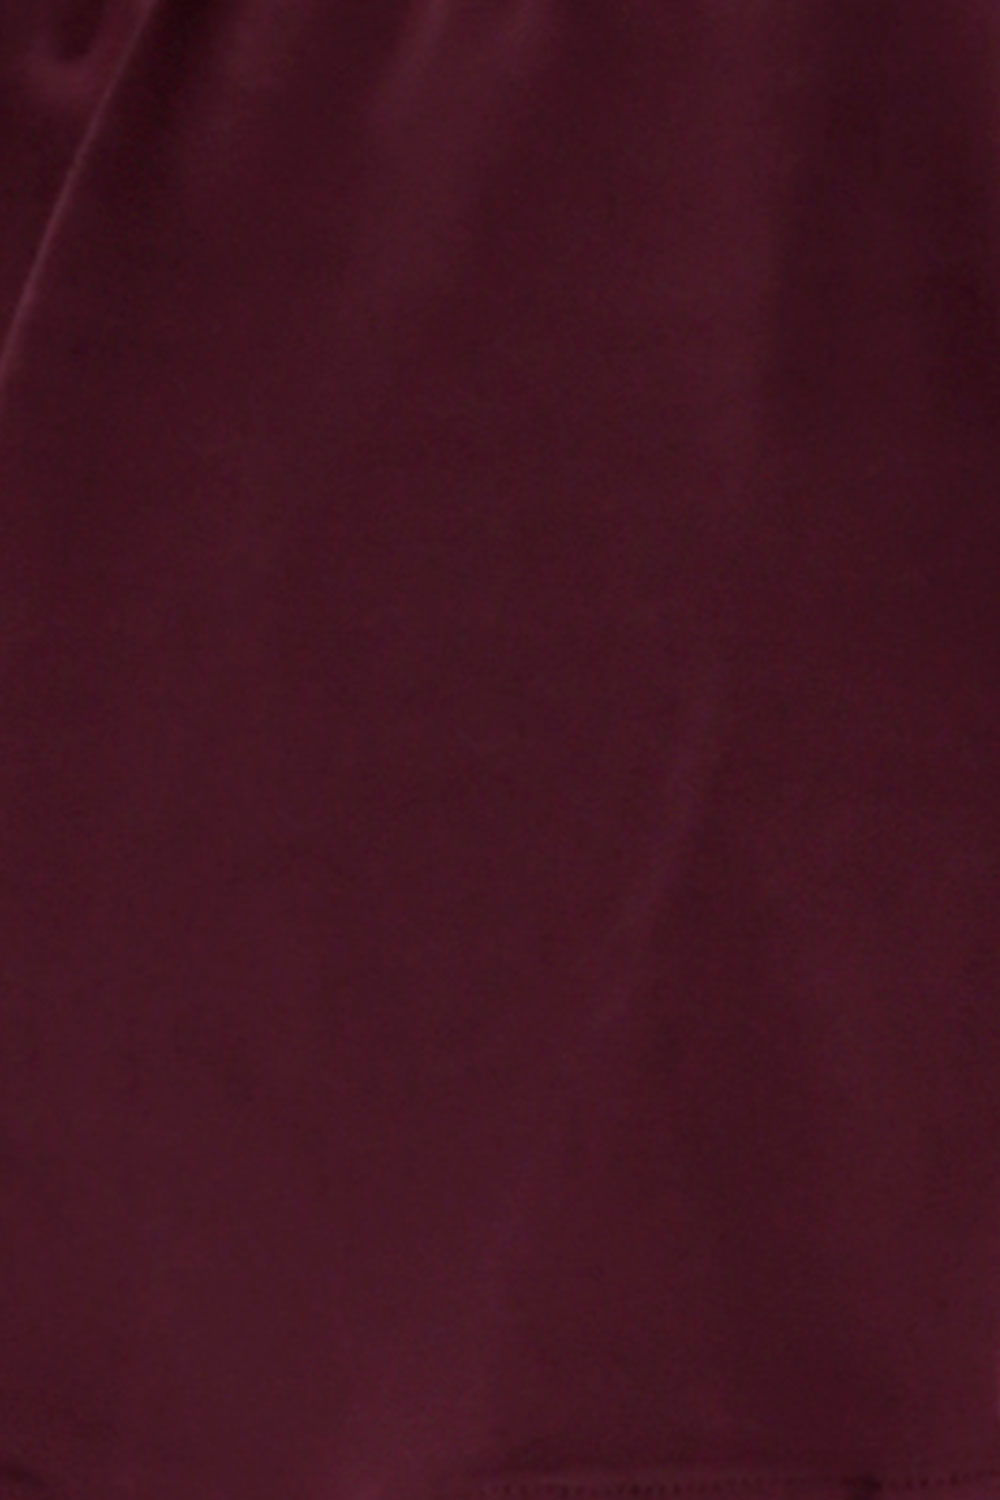 Plum slinky jersey fabric material. Made in Australia for women size 8 - 24.